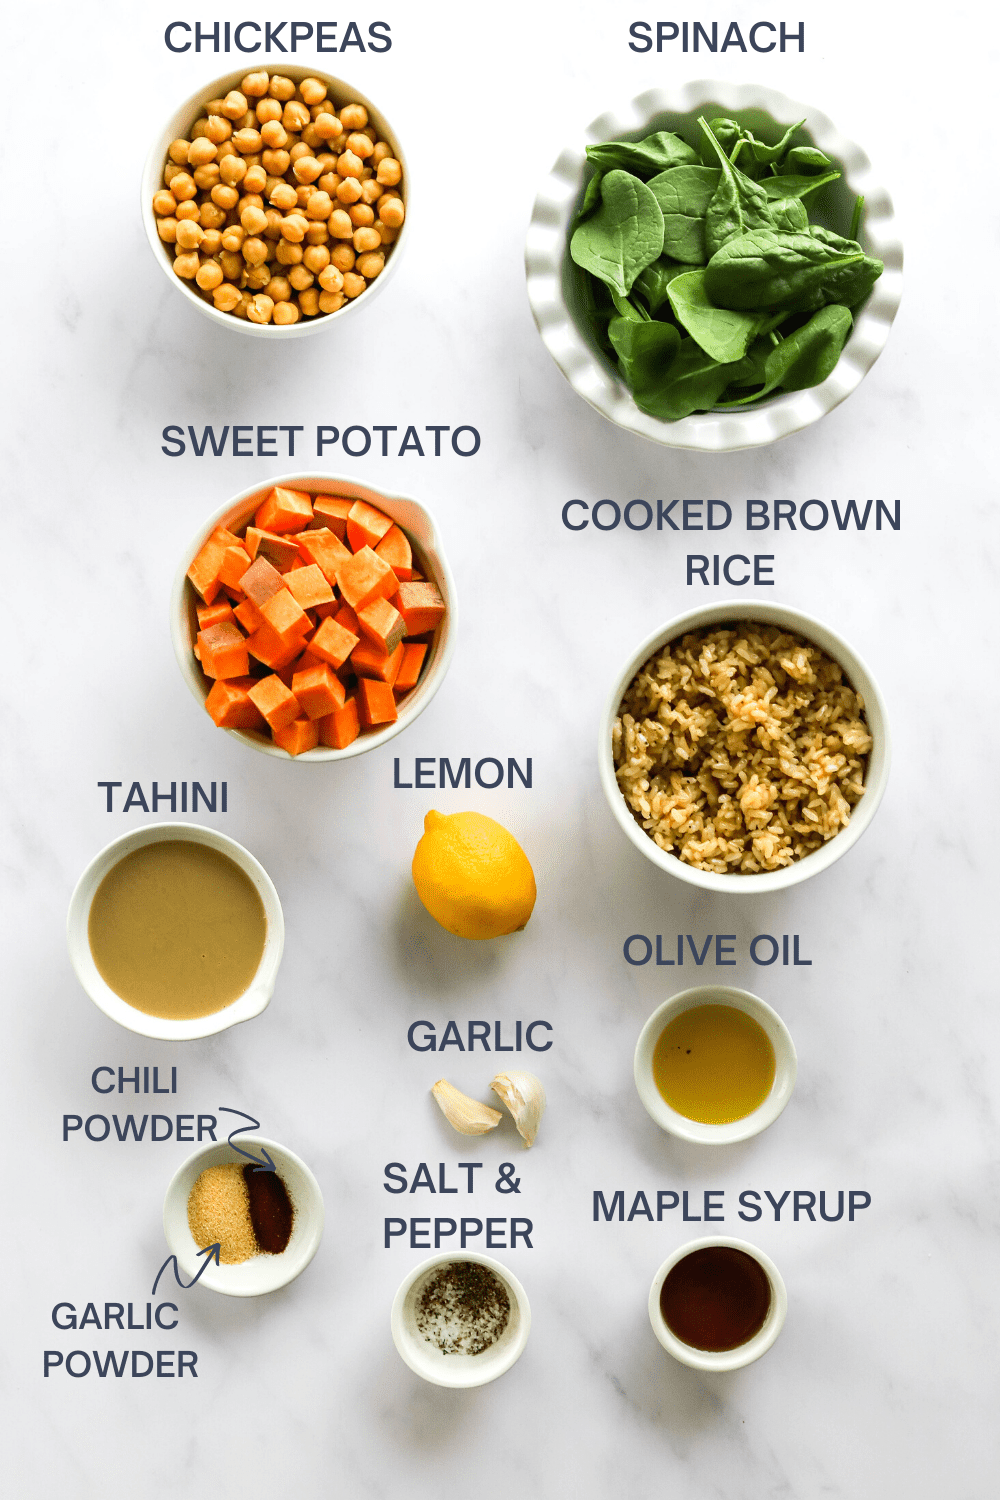 https://pinchmegood.com/wp-content/uploads/2022/03/SWEET-POTATO-CHICKPEA-BUDDHA-BOWL-INGREDIENTS-WITH-LABLES.png